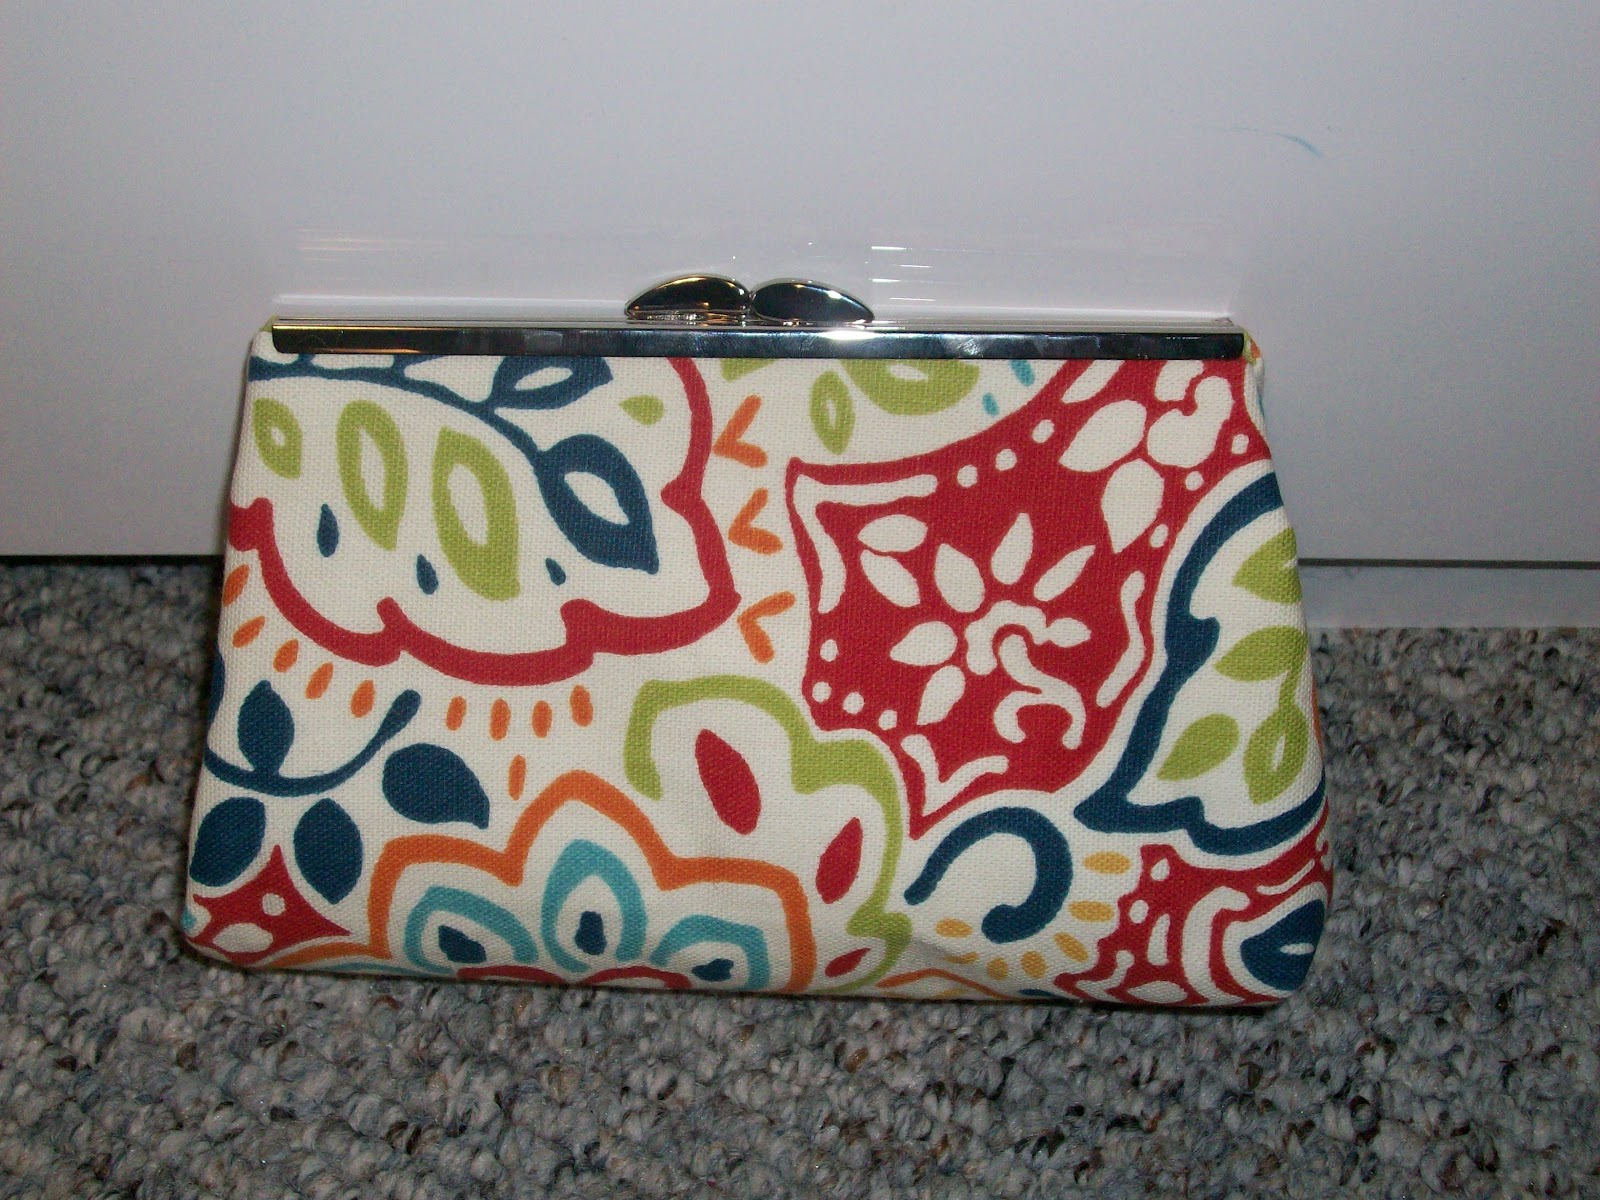 Jubilant Designs: Project 14: Awesome Clutch!